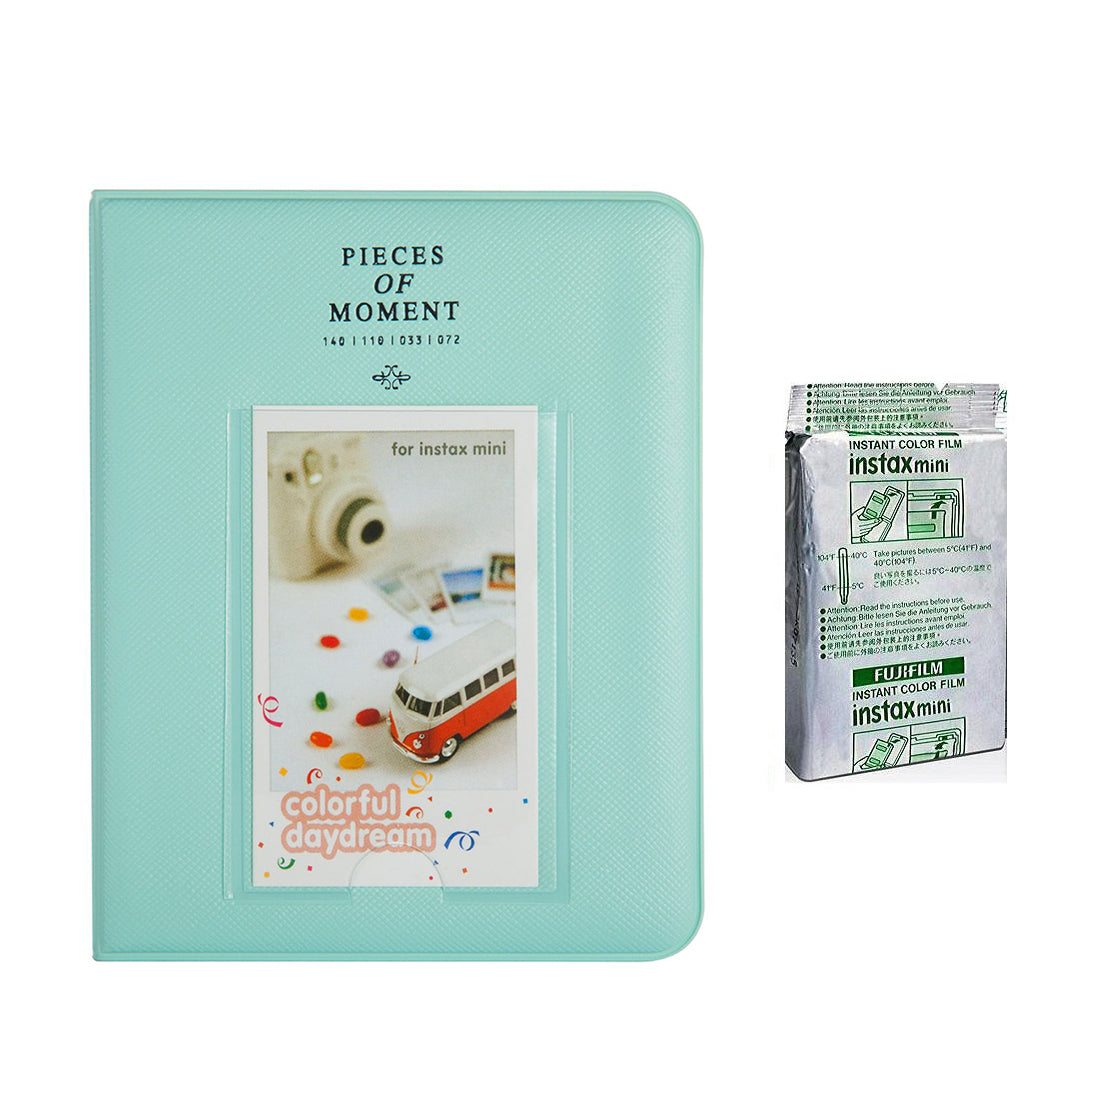 Fujifilm Instax Mini 10X1 blue marble Instant Film with Instax Time Photo Album 64 Sheets Ice blue